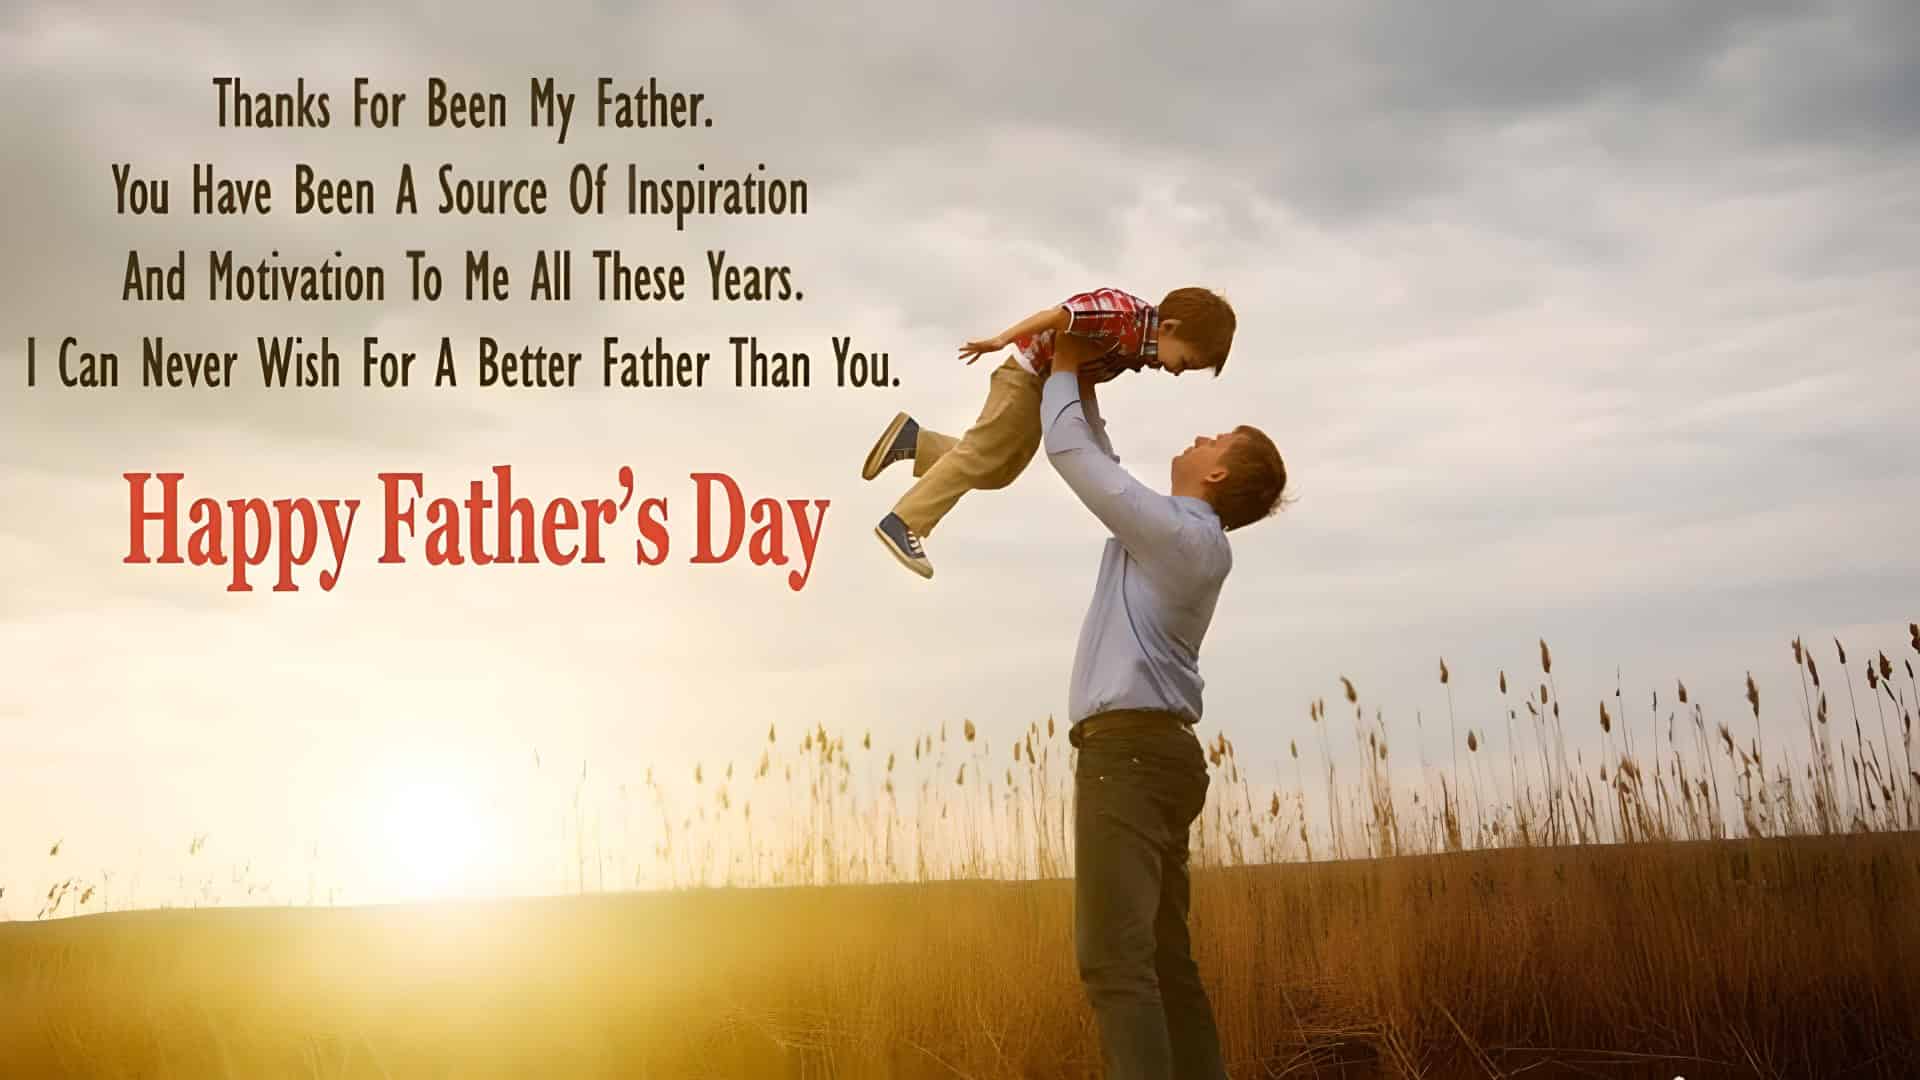 Father's Day Greetings from Son